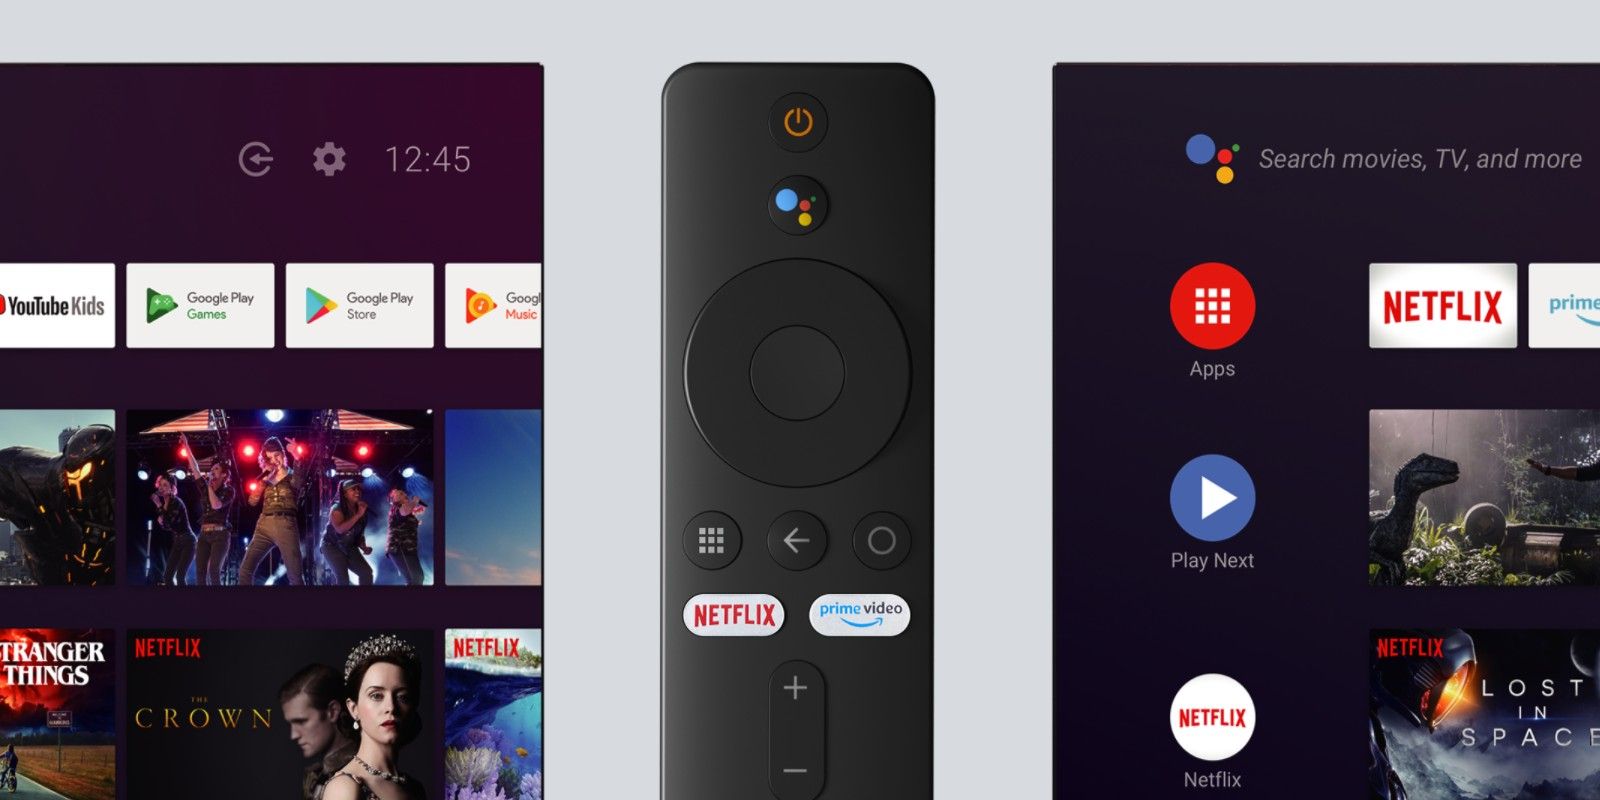 How To Use Your Phone As A Virtual Remote on Android TV/Google TV